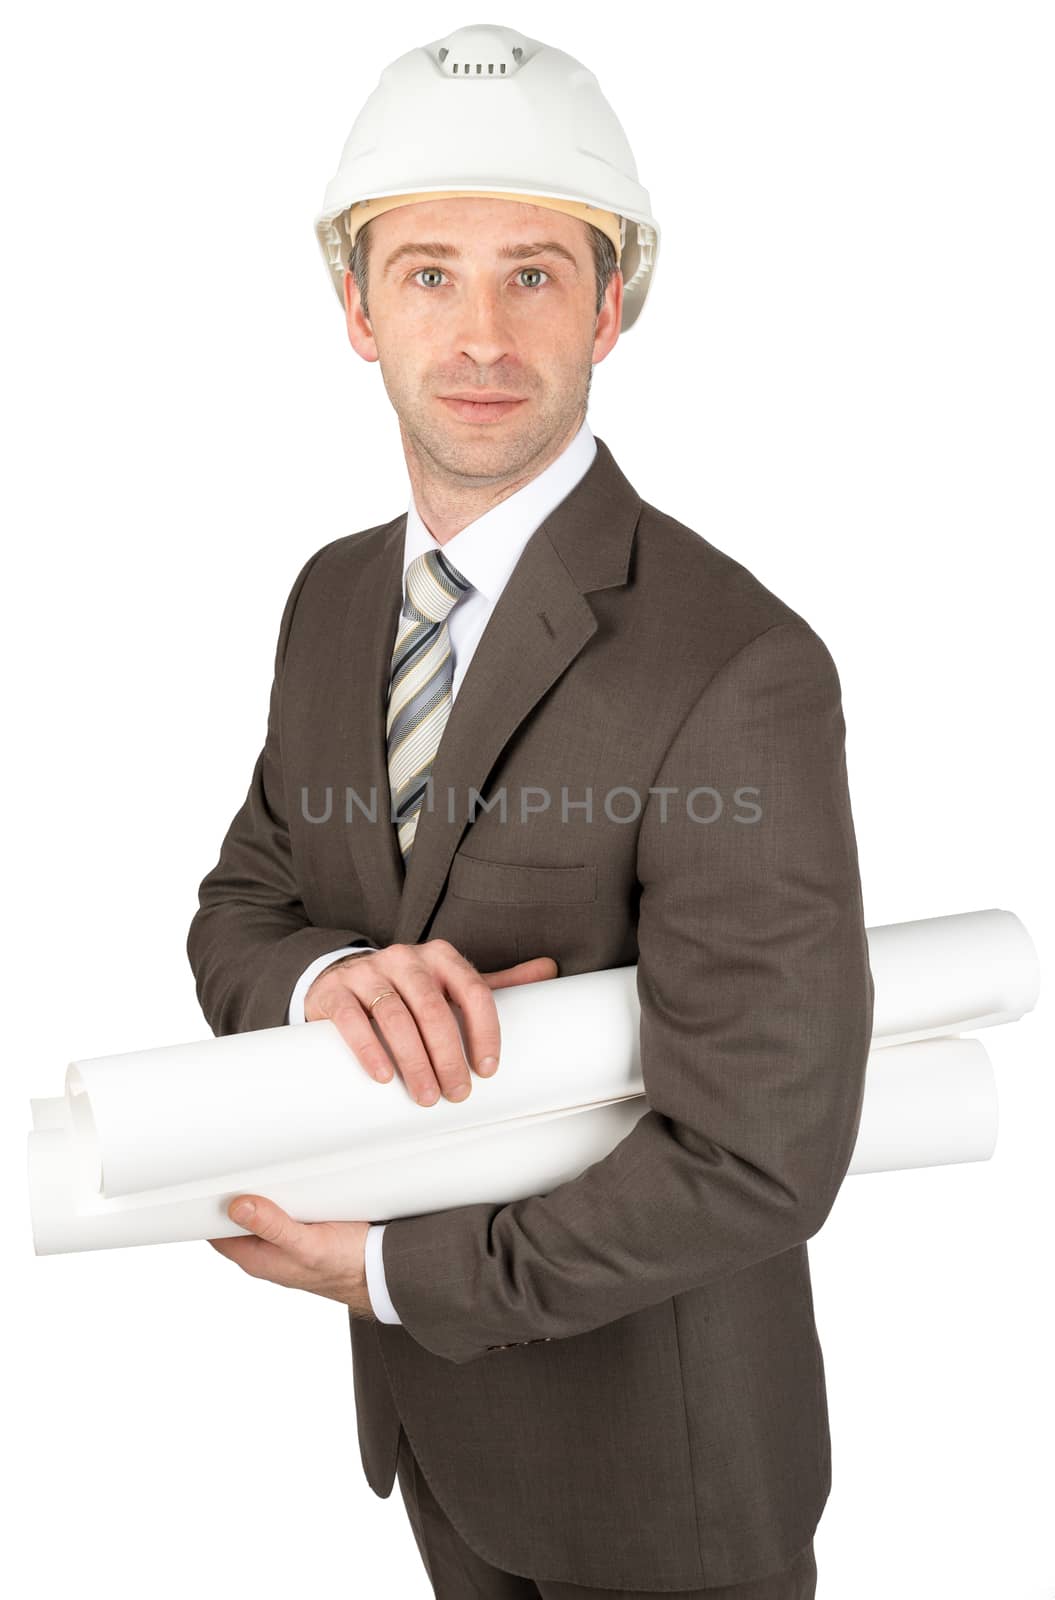 Man with hard hat holding rolled up blueprints. Isolated on white background